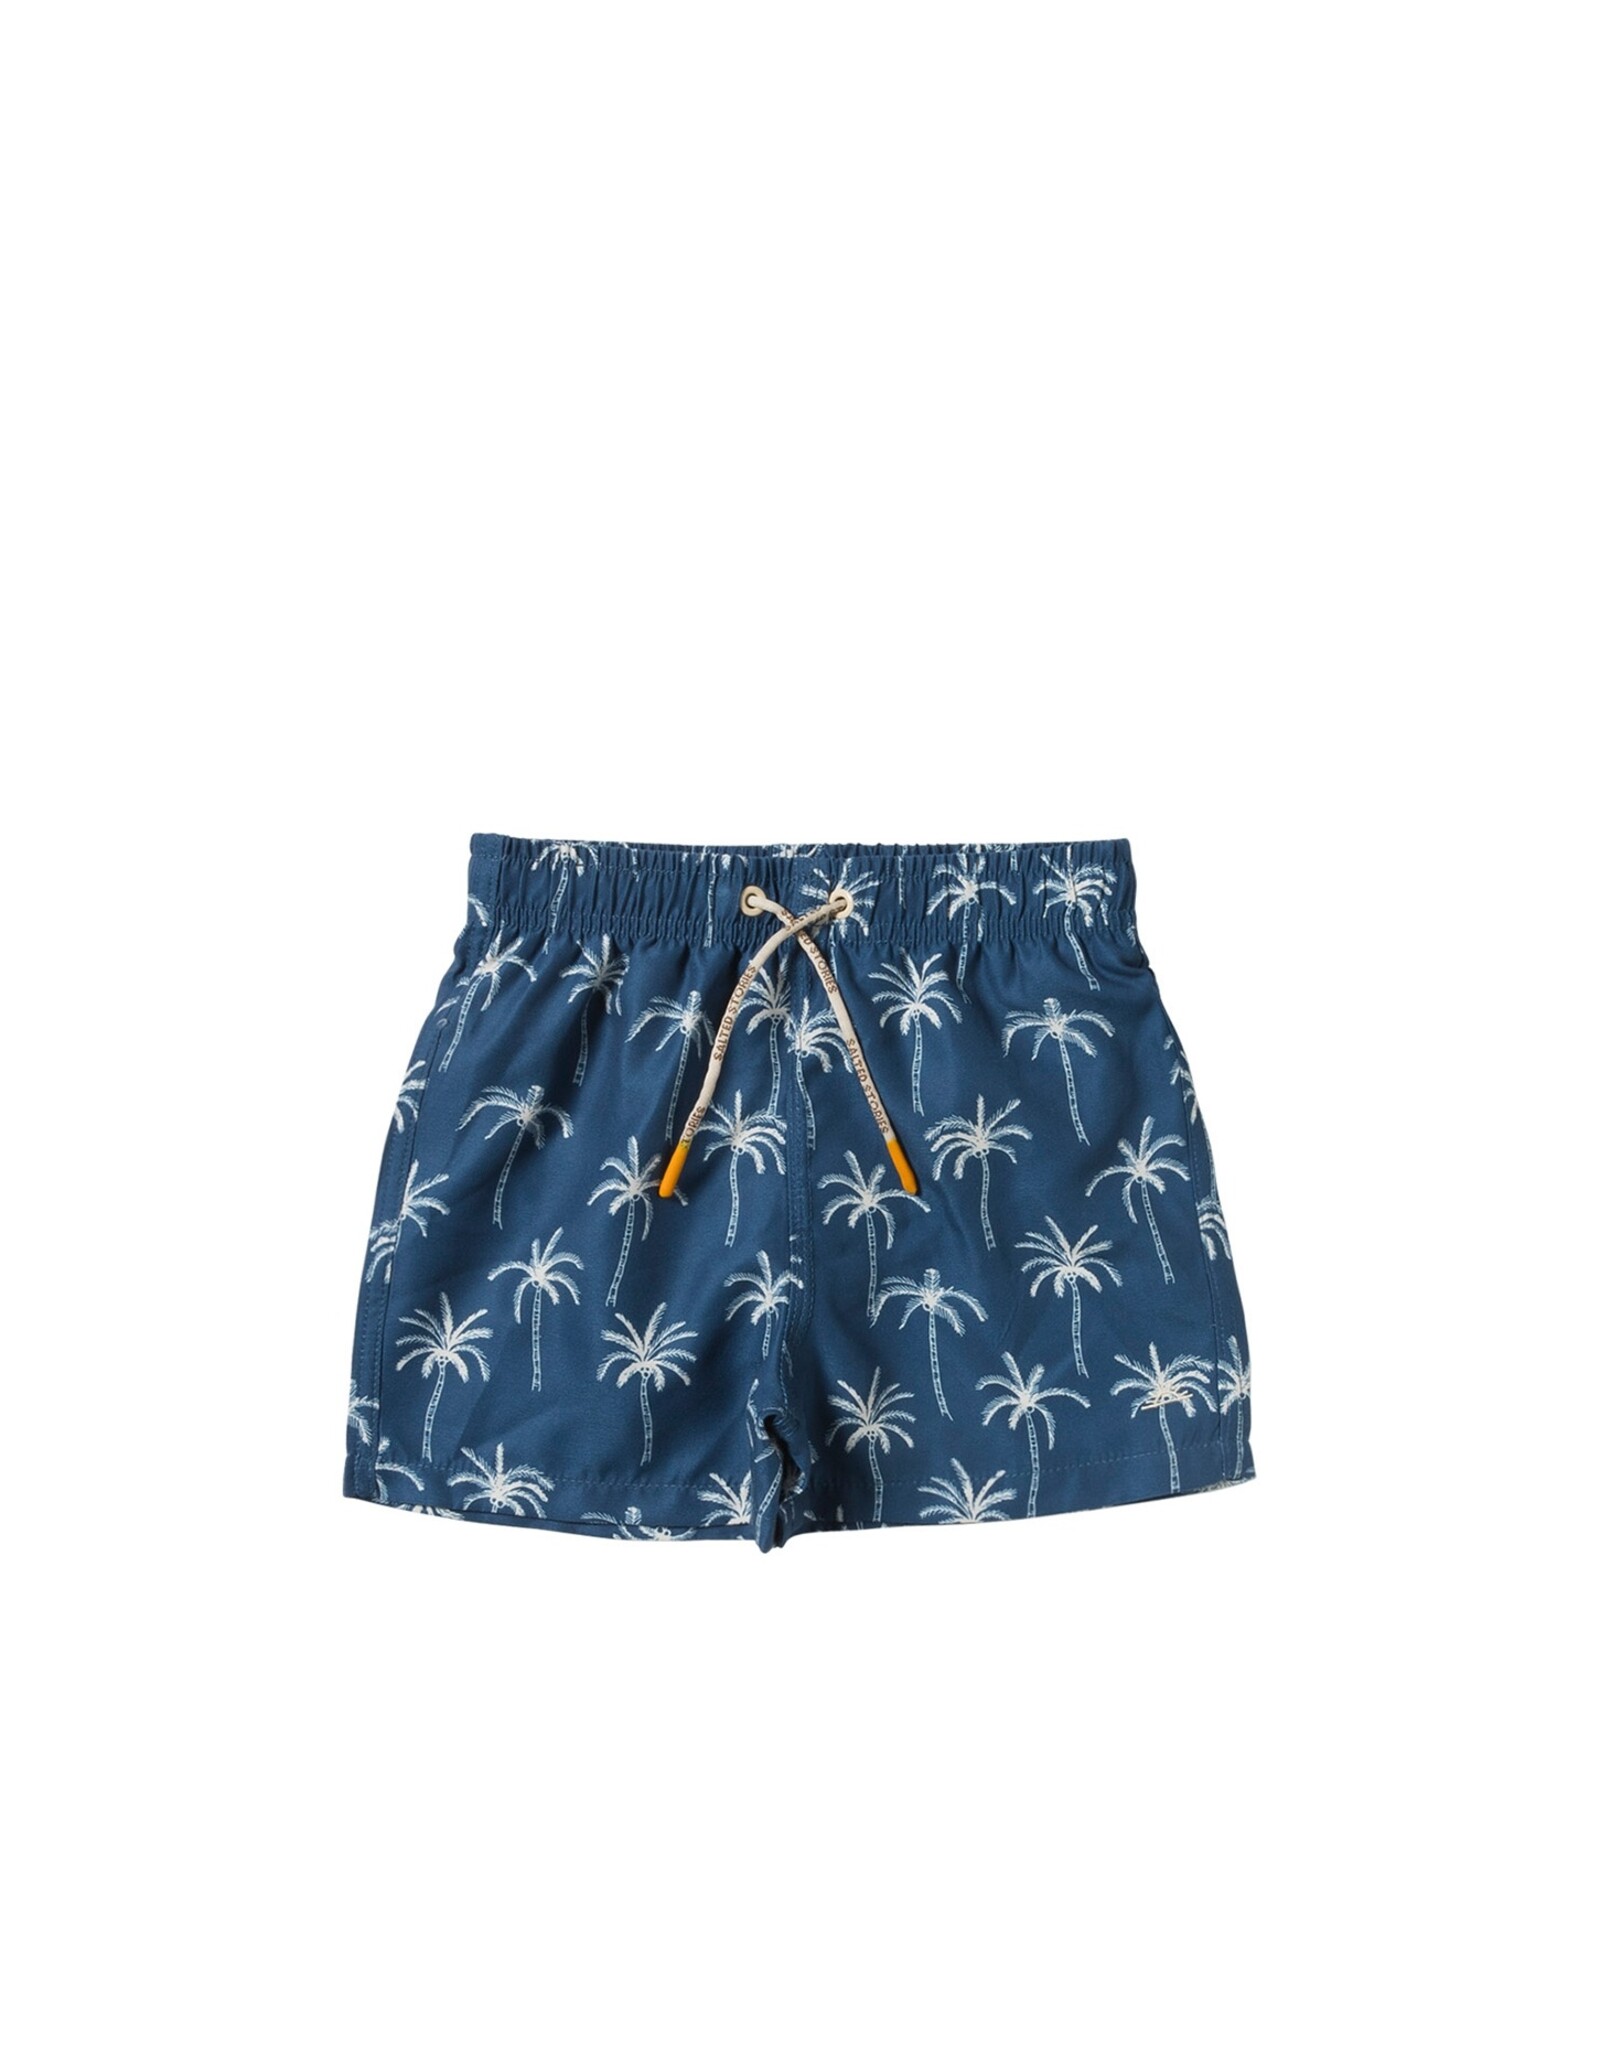 Salted Stories Swimwear Tropic | Shawn Ensign Blue